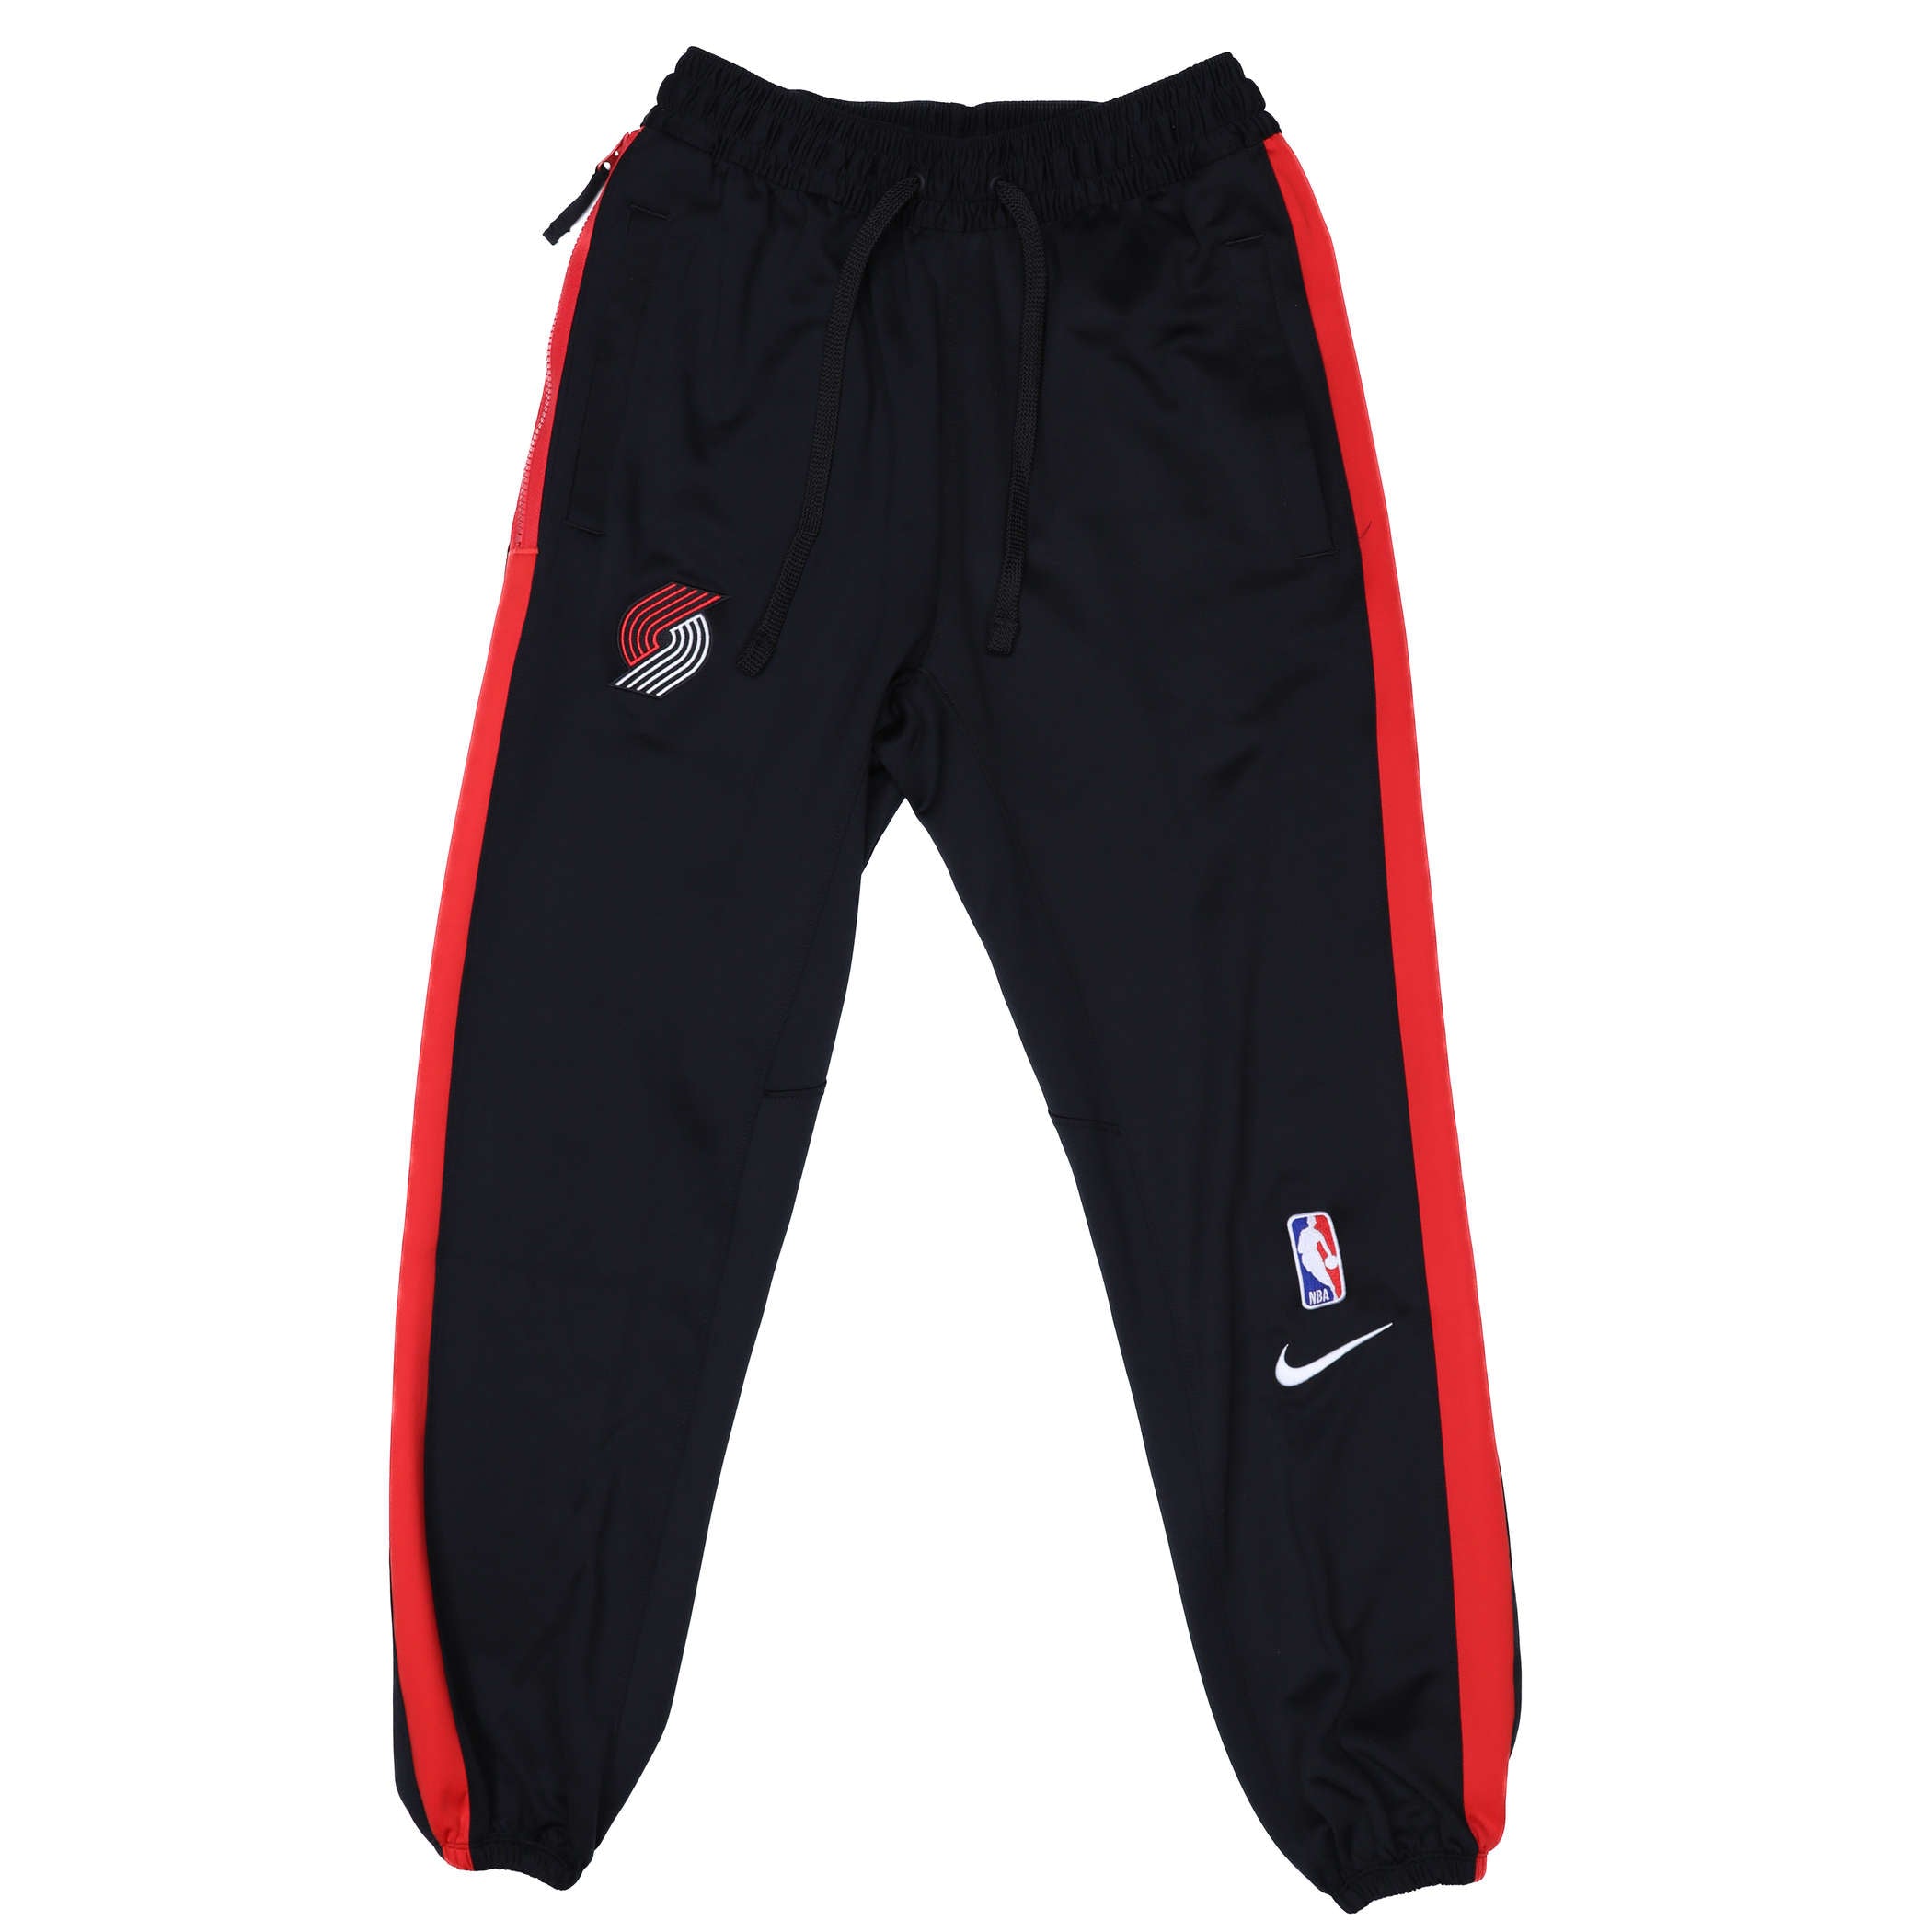 Nike Showtime Pants  Rip City Clothing - The Official Blazers Team Store